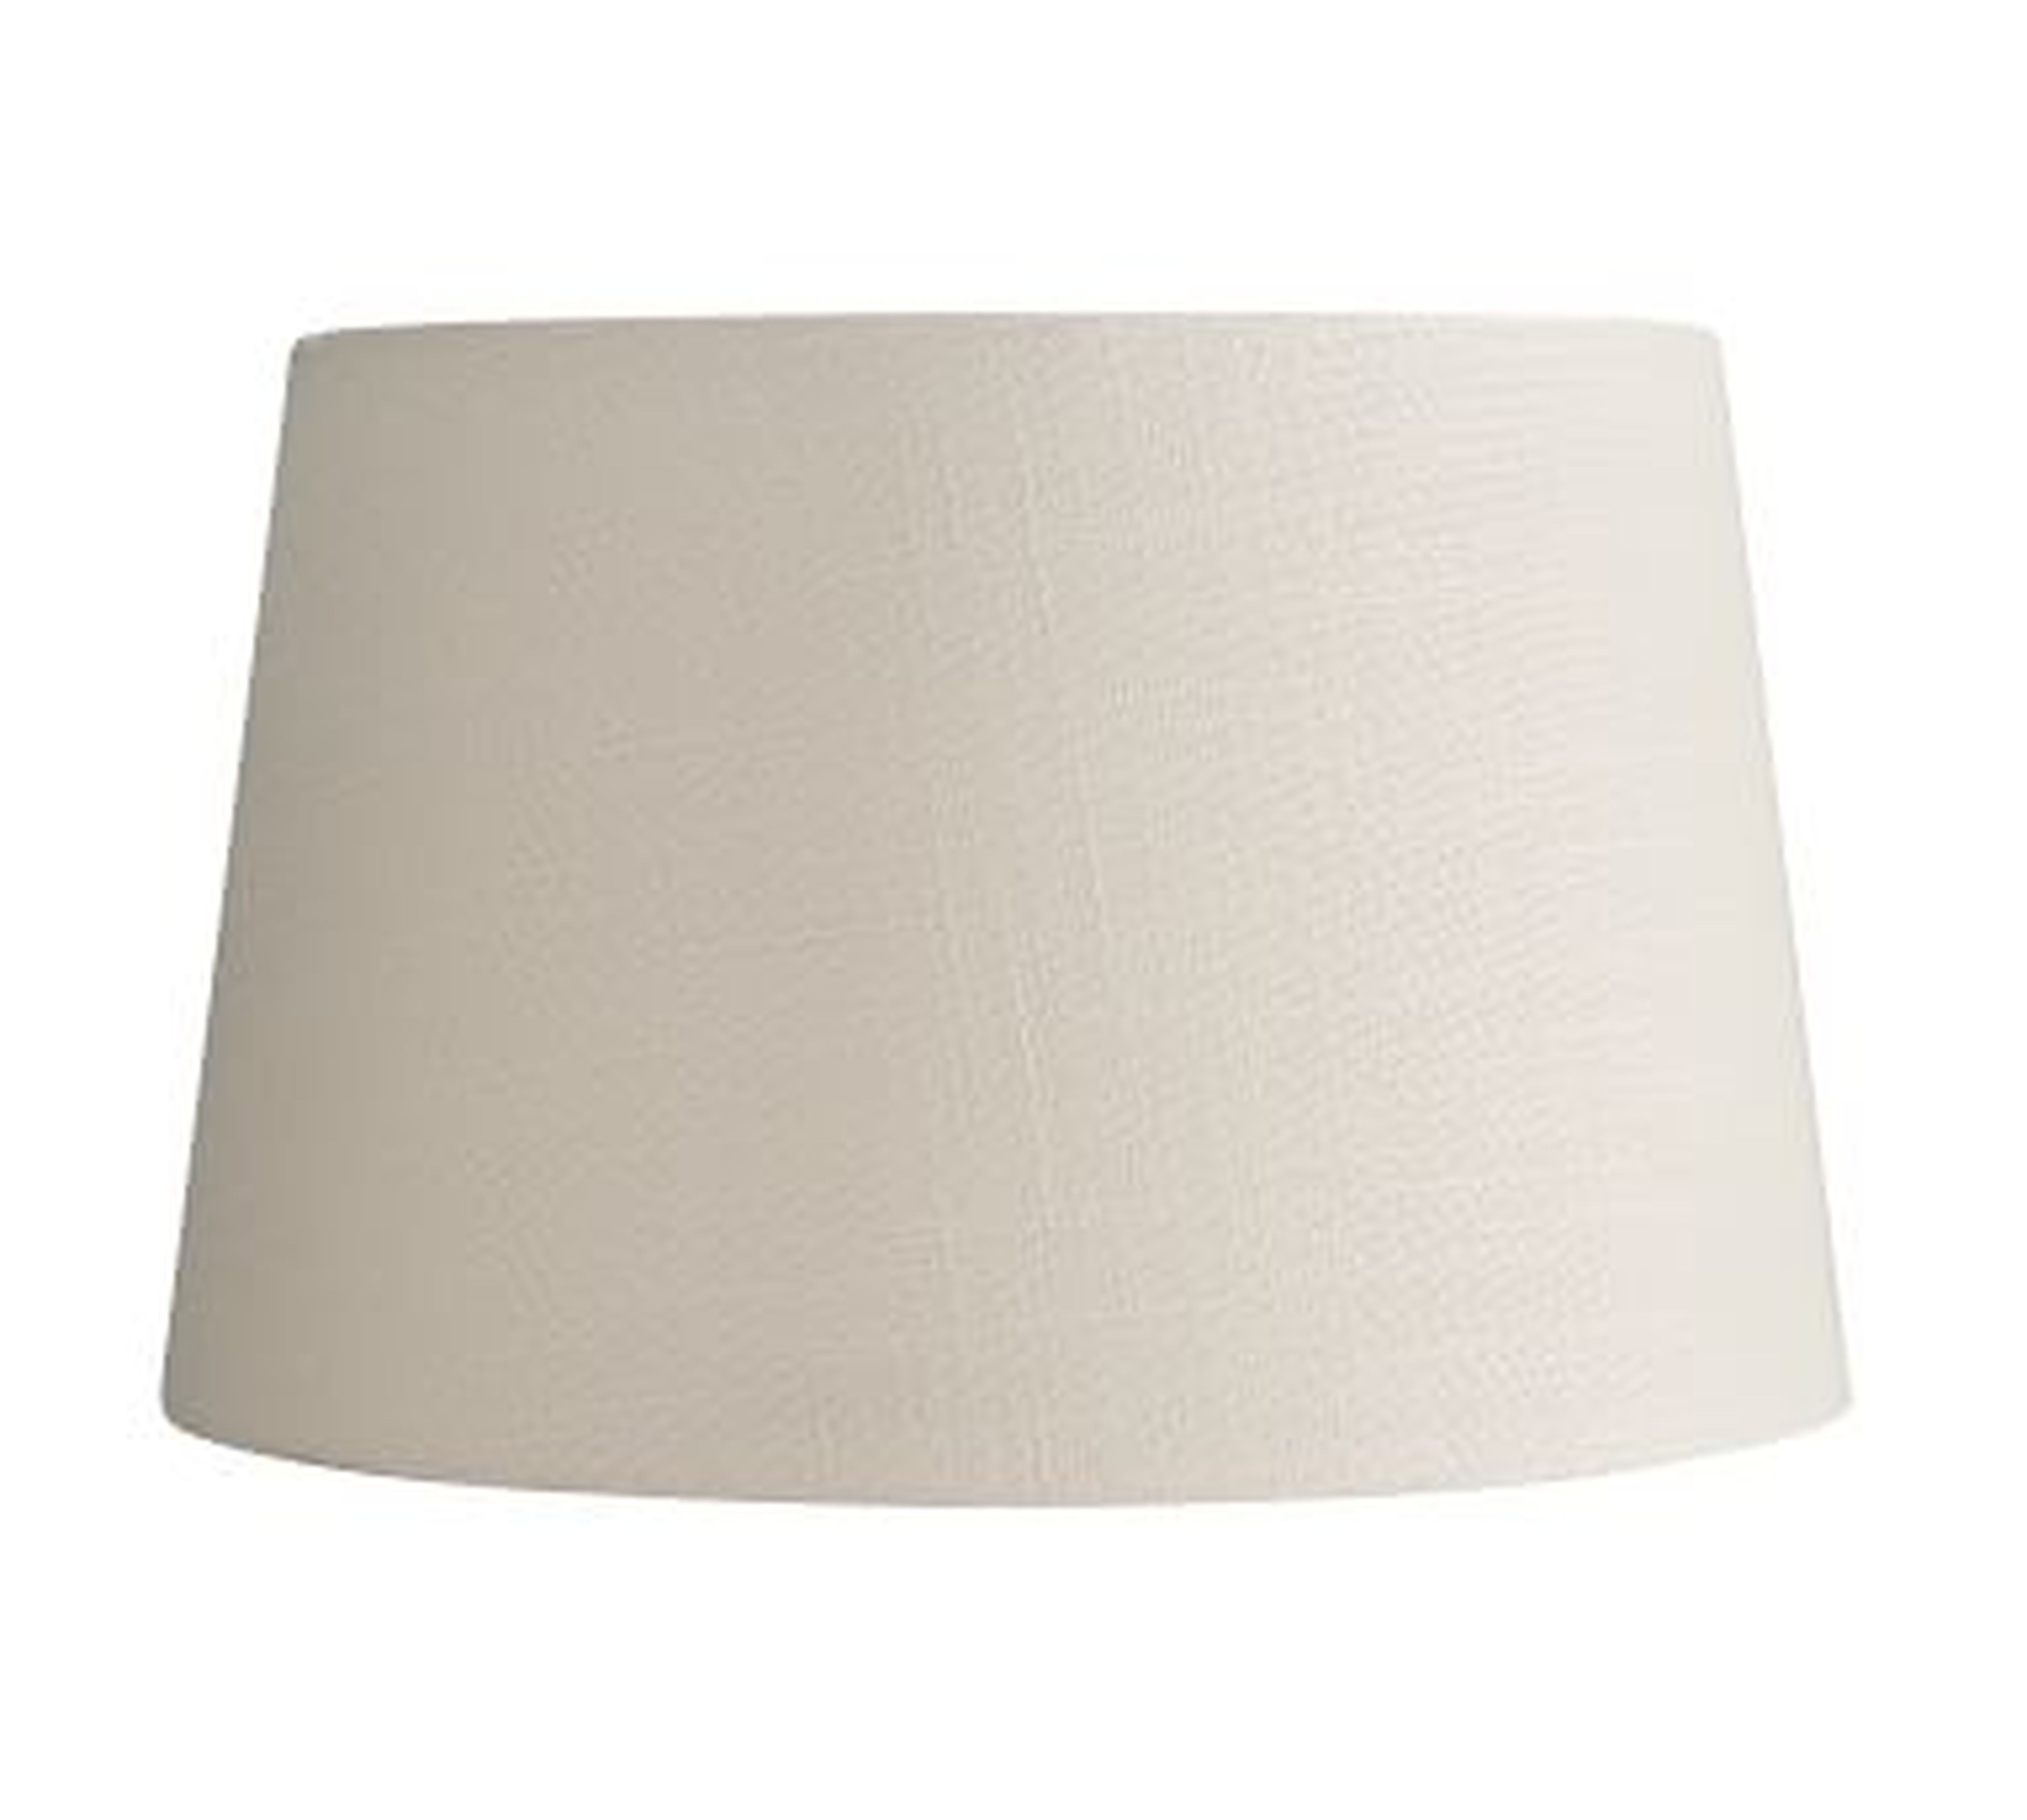 Textured Gallery Tapered Shade, Large, Sand - Pottery Barn